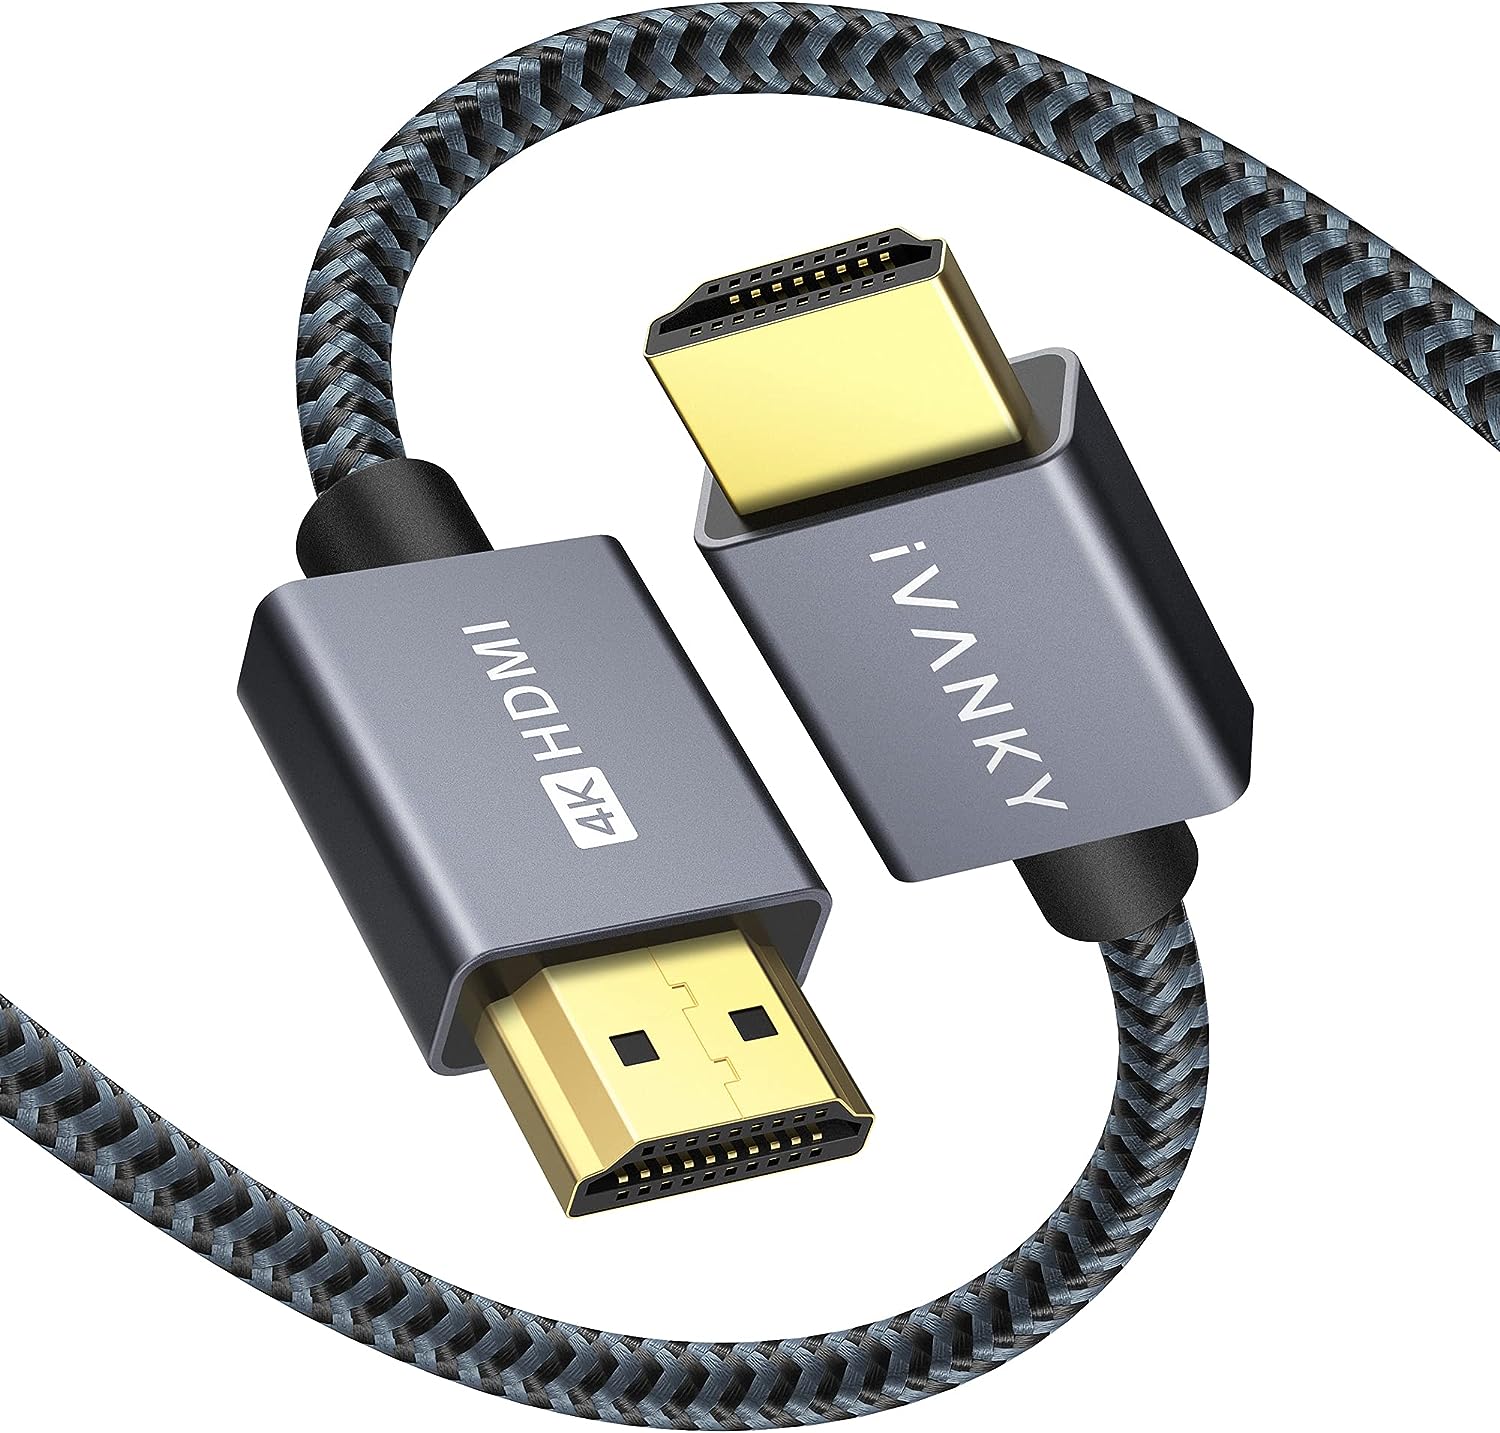 IVANKY 4K HDMI Cable 6.6 ft, High Speed 18Gbps HDMI [...]